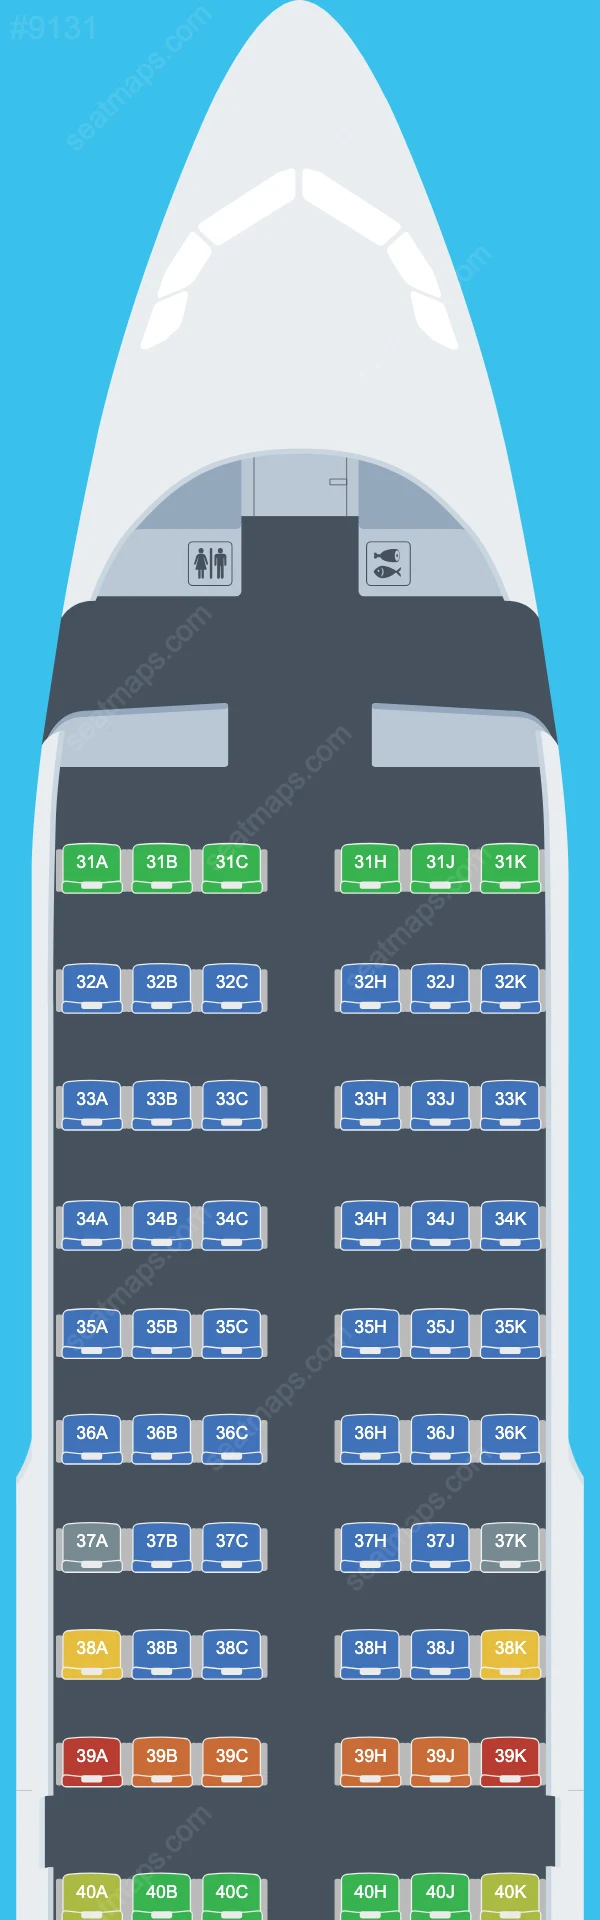 China Southern Airbus A319 Seat Maps A319-100 V.4